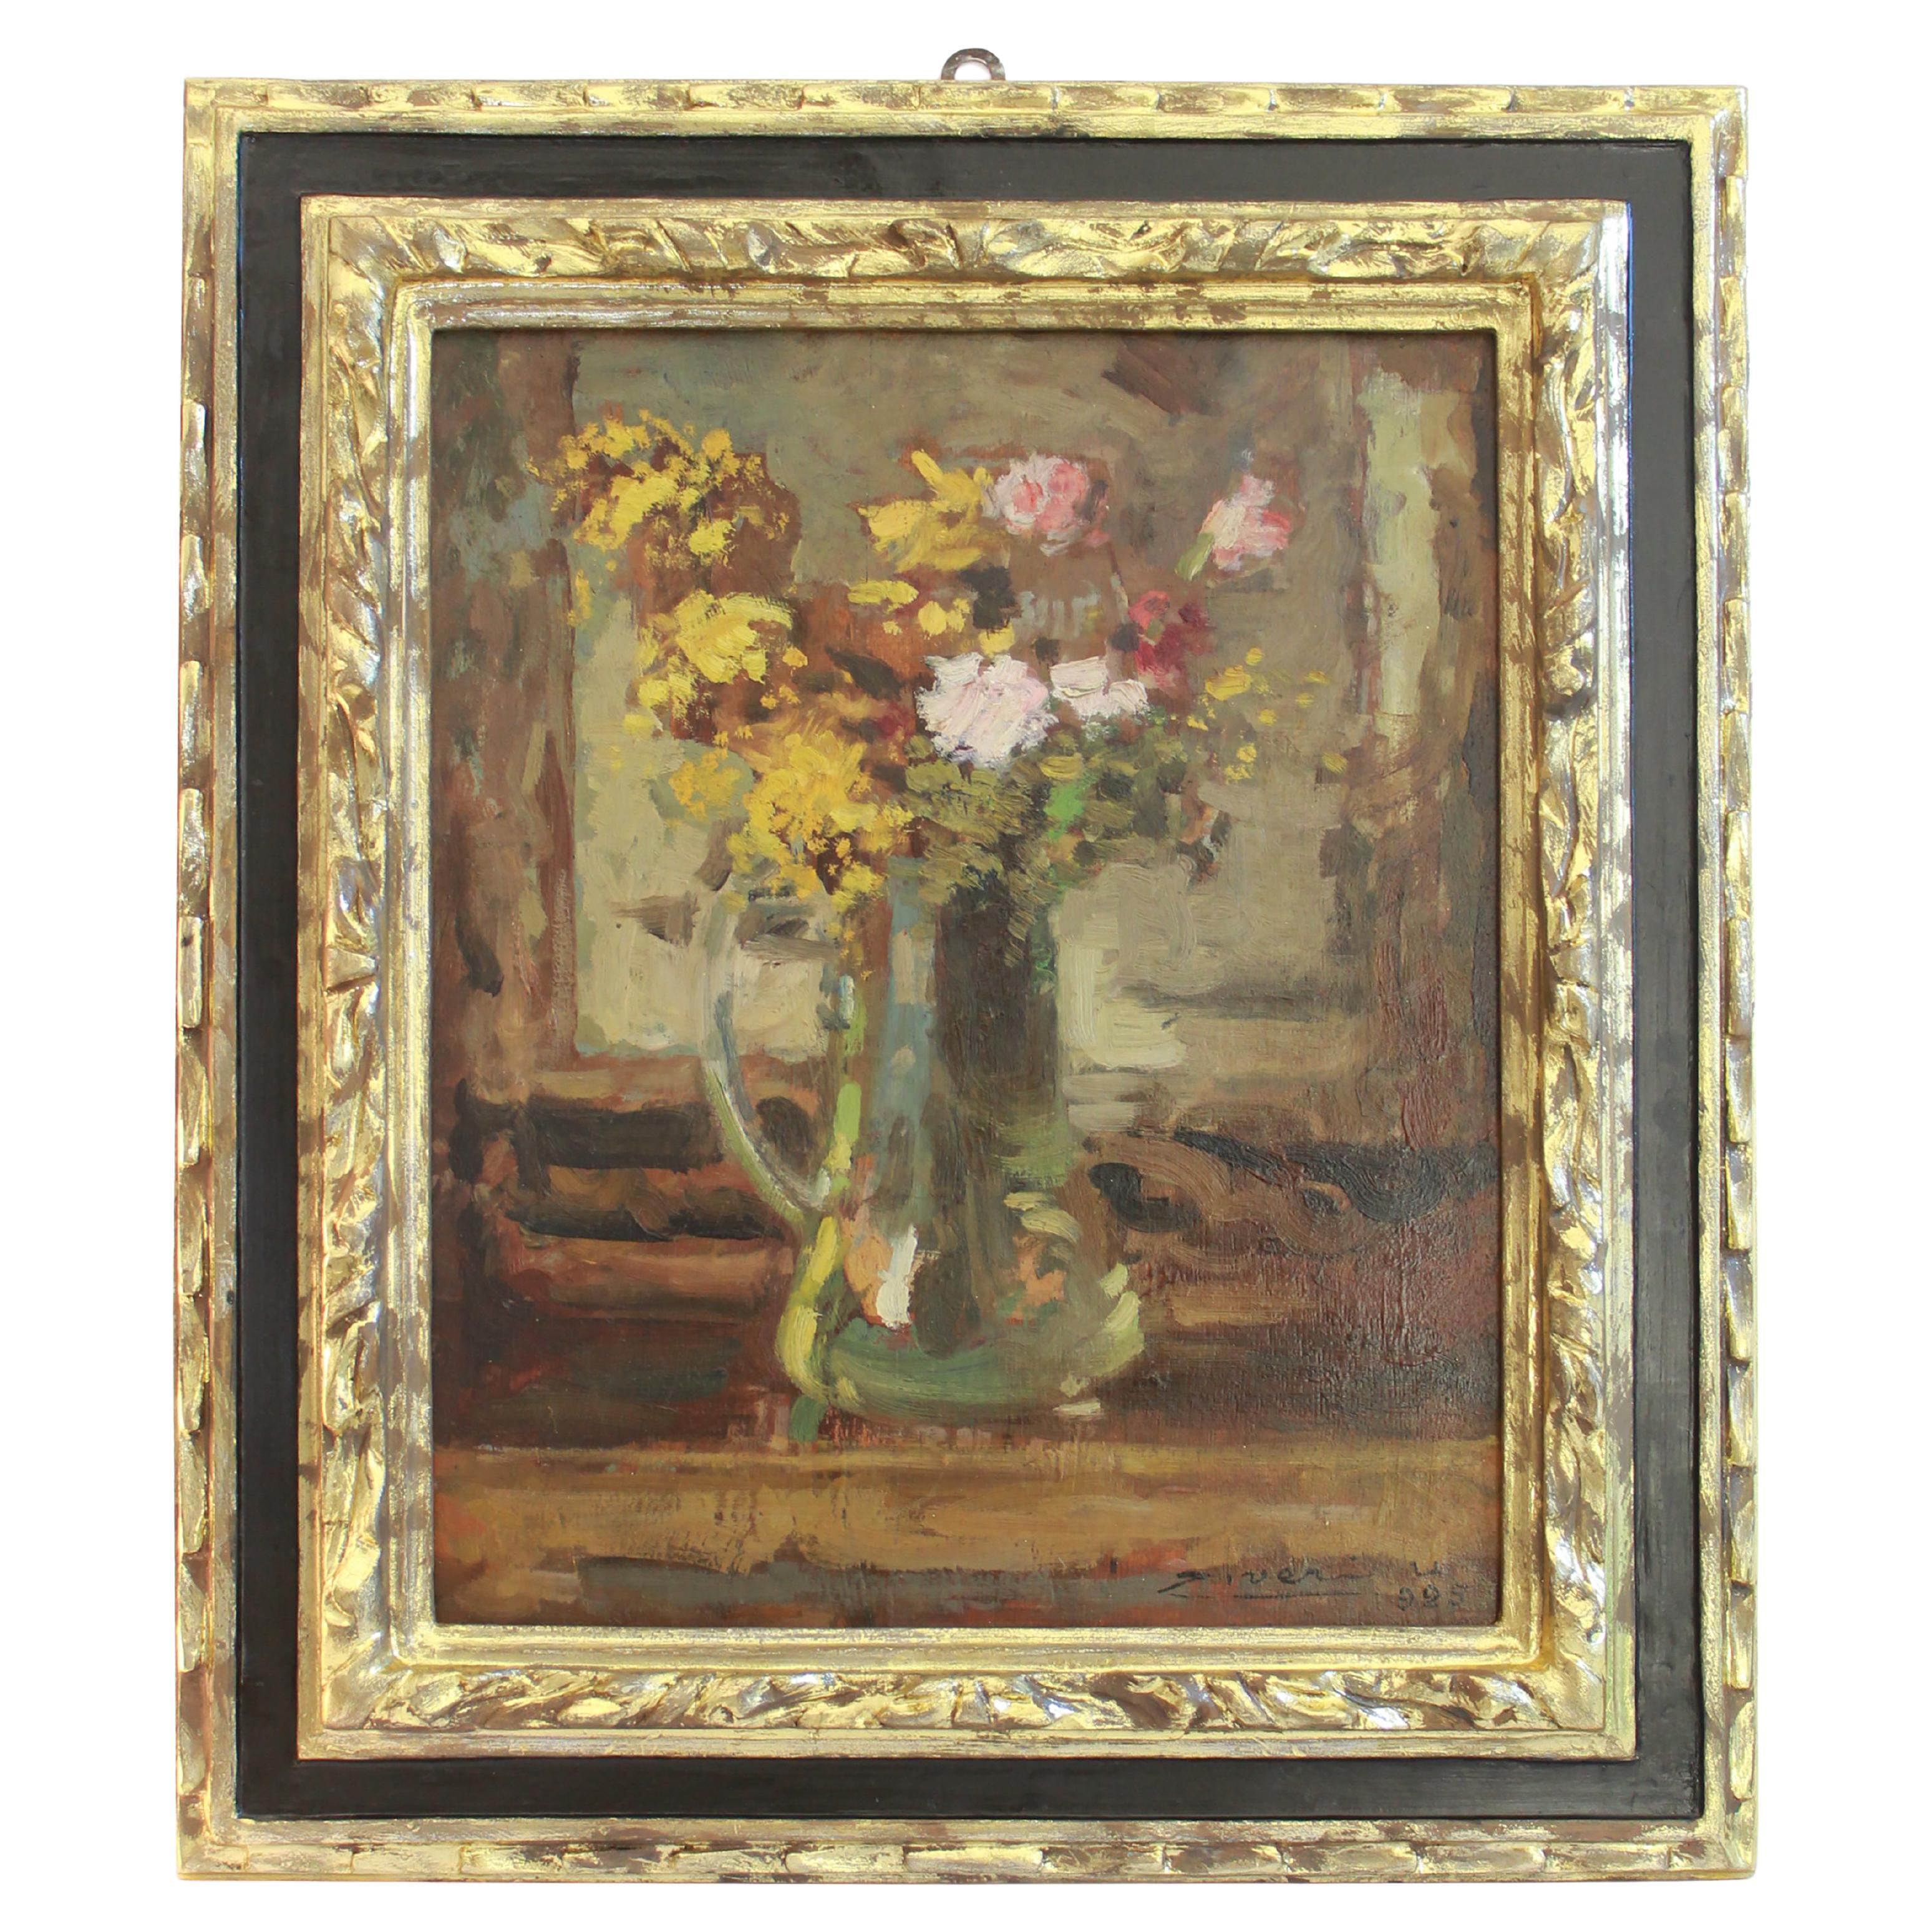 Umberto Ziveri 'Italian 1891-1971' Oil Painting Signed and Dated '1925' Gorgeous For Sale 6